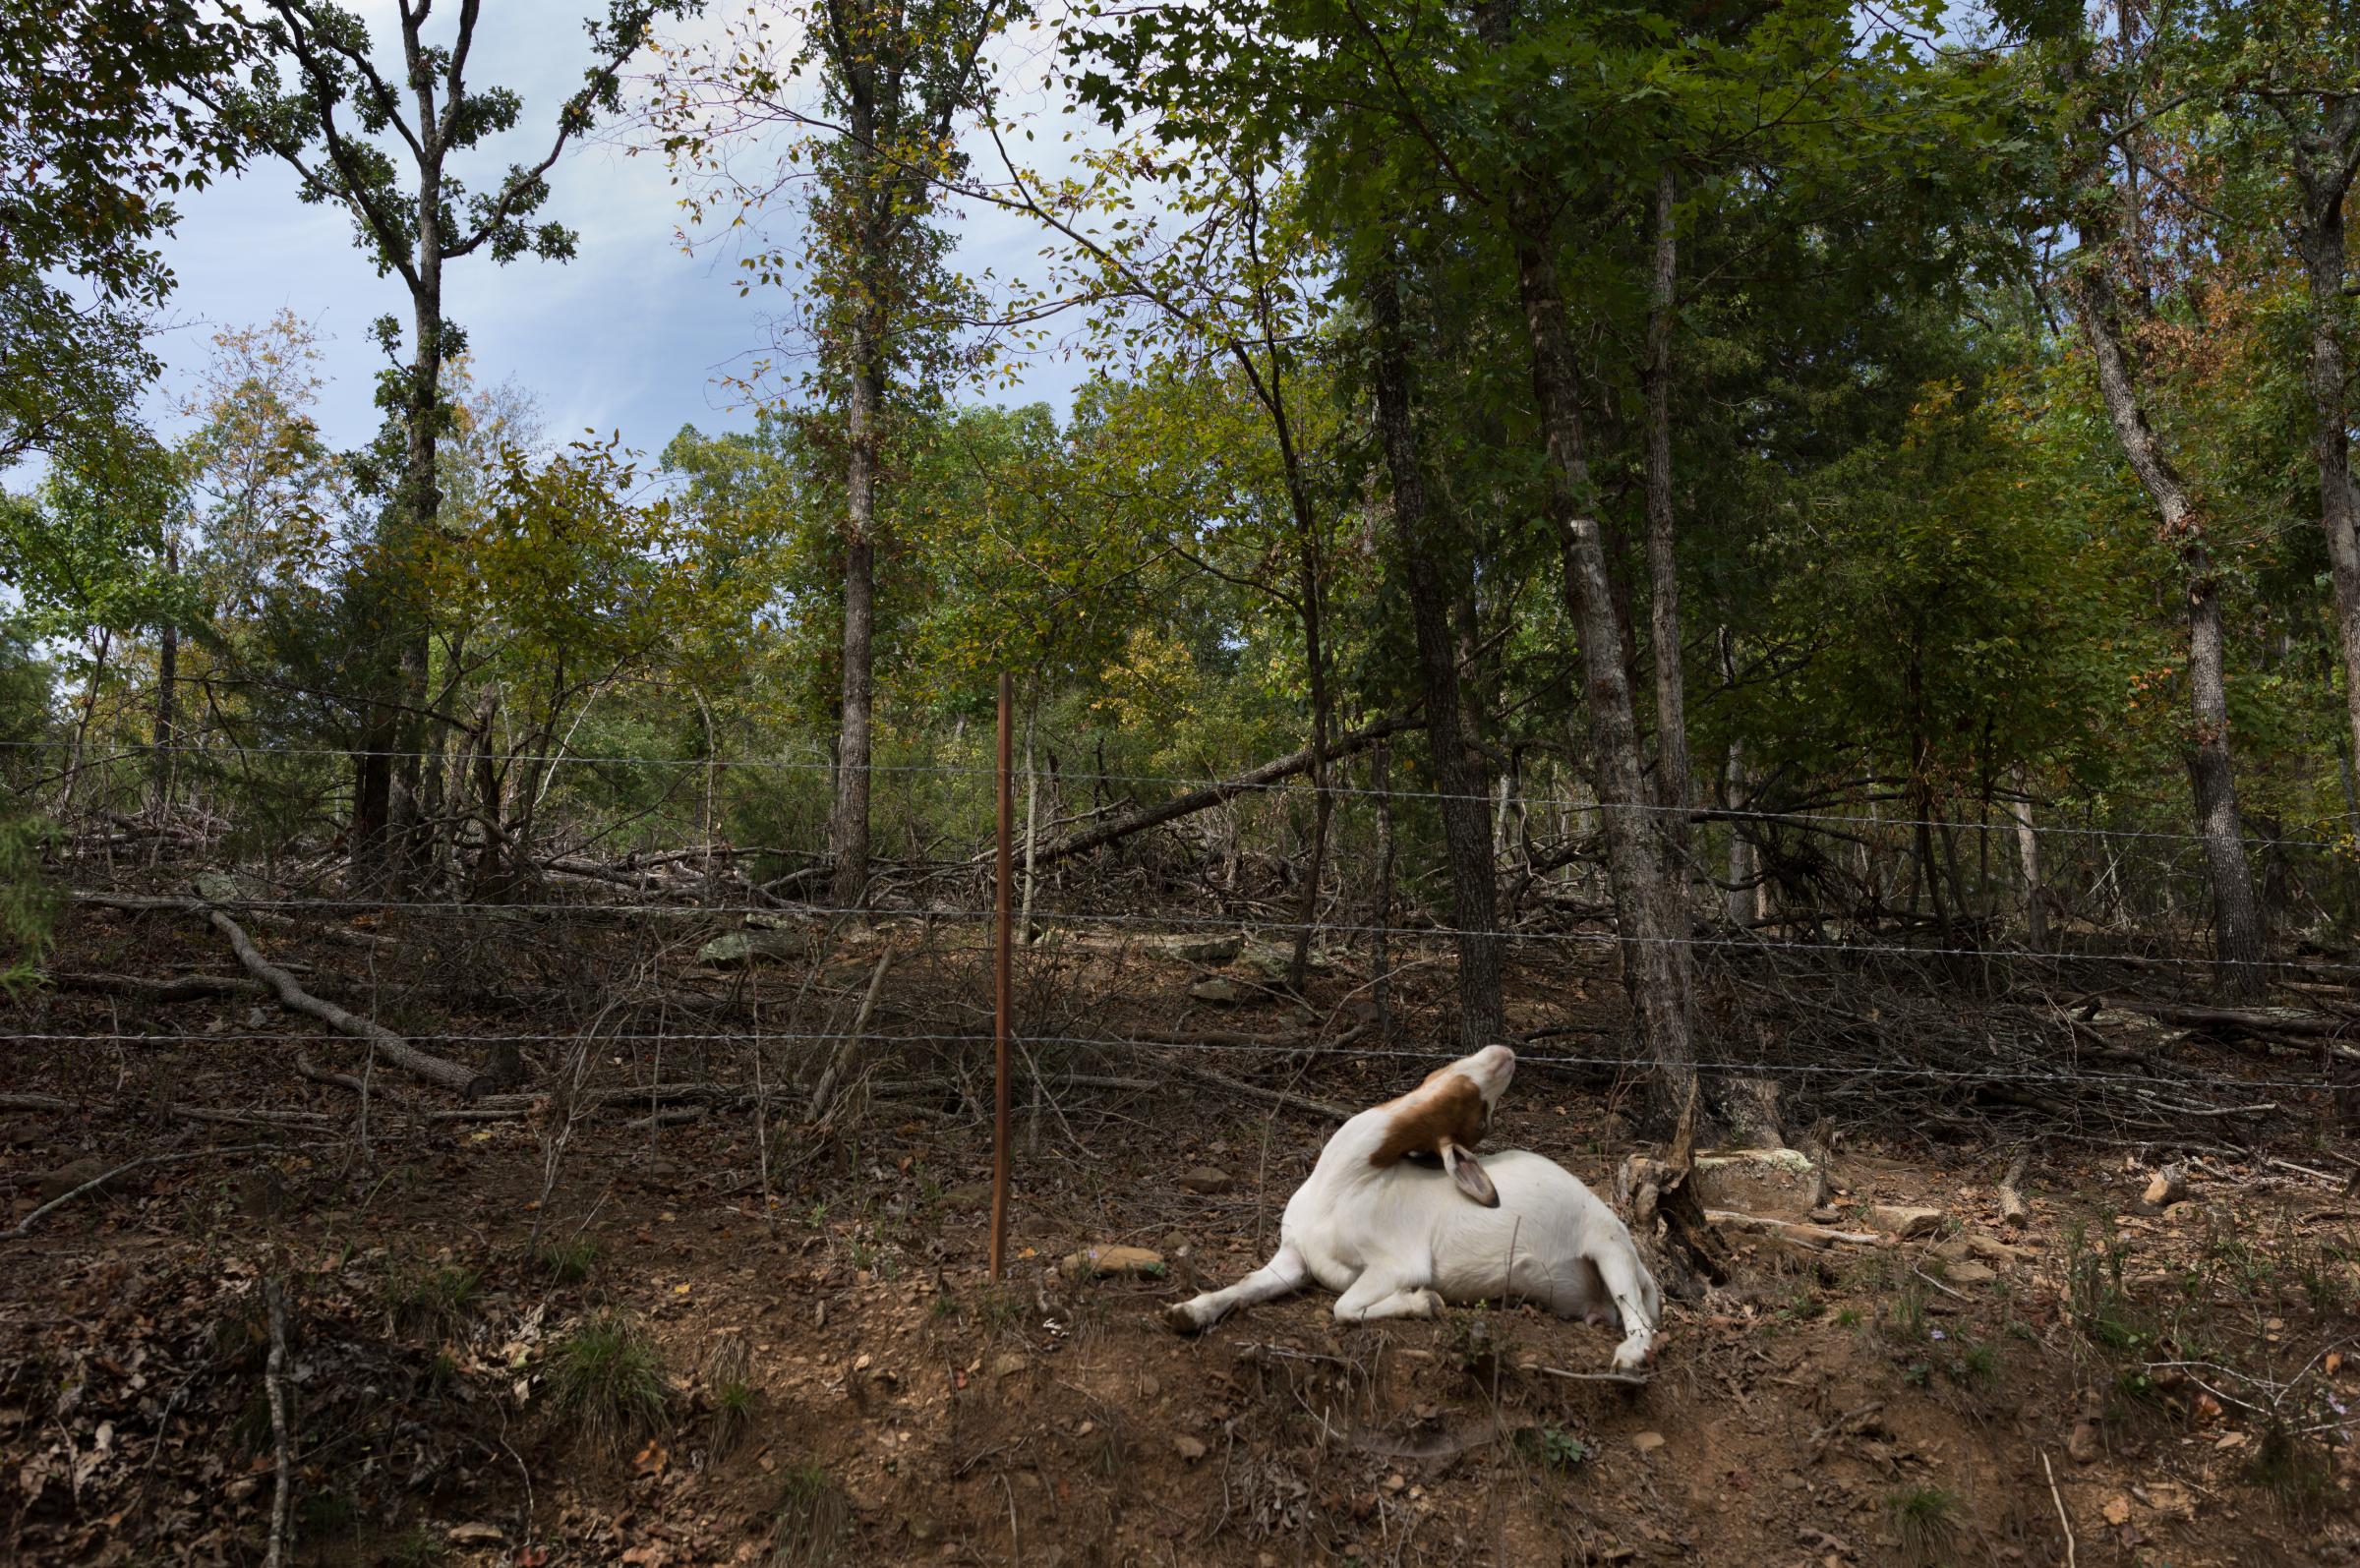 Land Bound in the Ozarks - Goats can still be found walking on a dirt road in deeply...